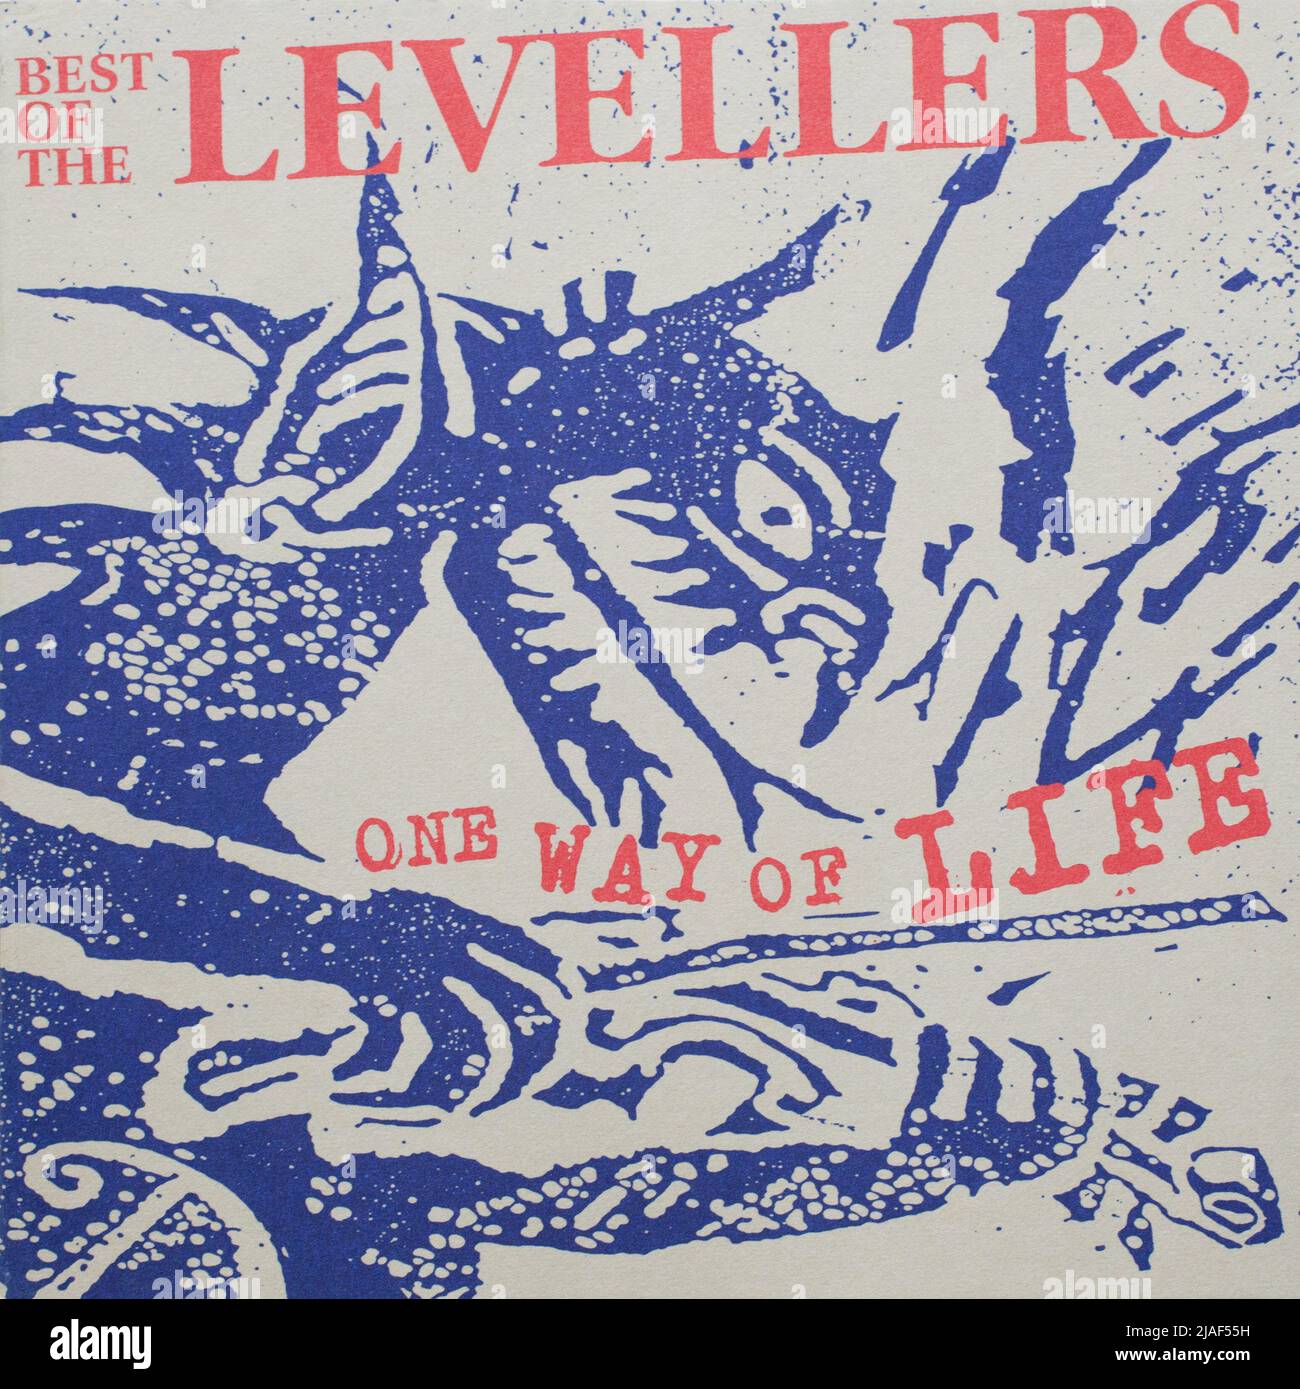 The cd album cover to, Best of the Levellers, One Way of Life Stock Photo